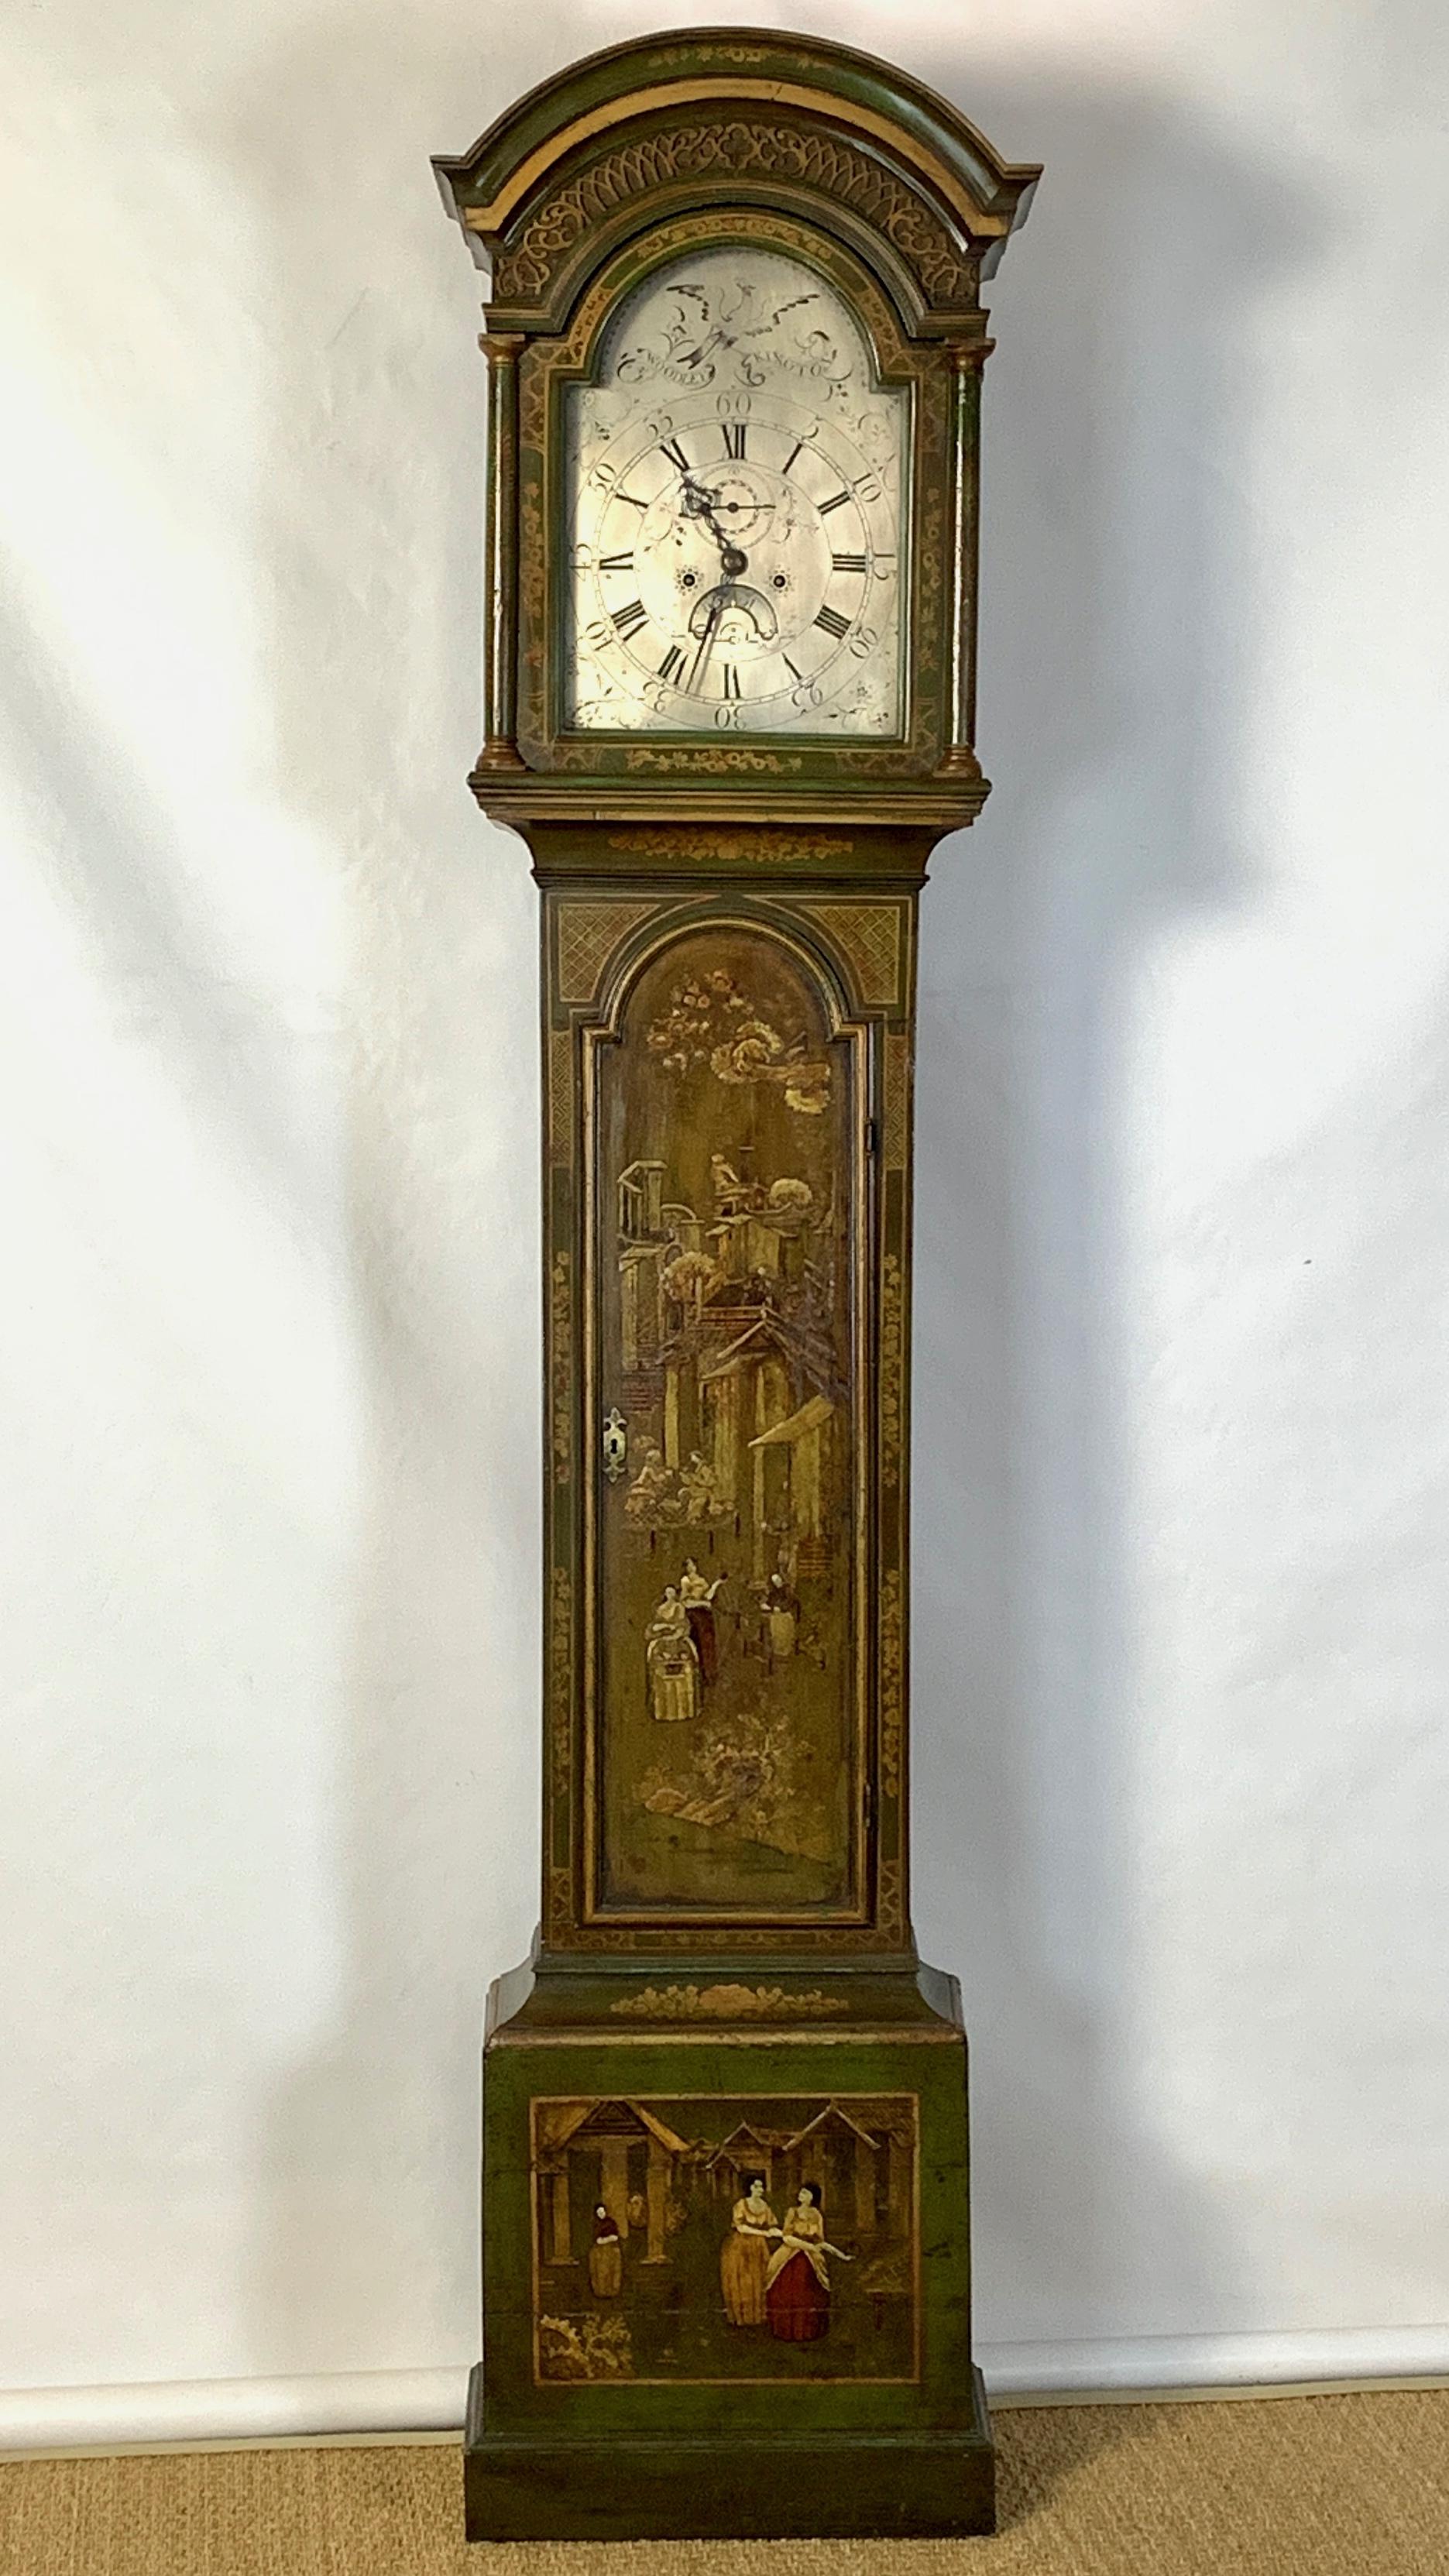 A late 18th century English 8-day tall case clock by Woodley, Kington. The elegant green painted chinoiserie decorated case displays figures in a fanciful landscape. The graceful domed bonnet holds a silvered face with complications including second